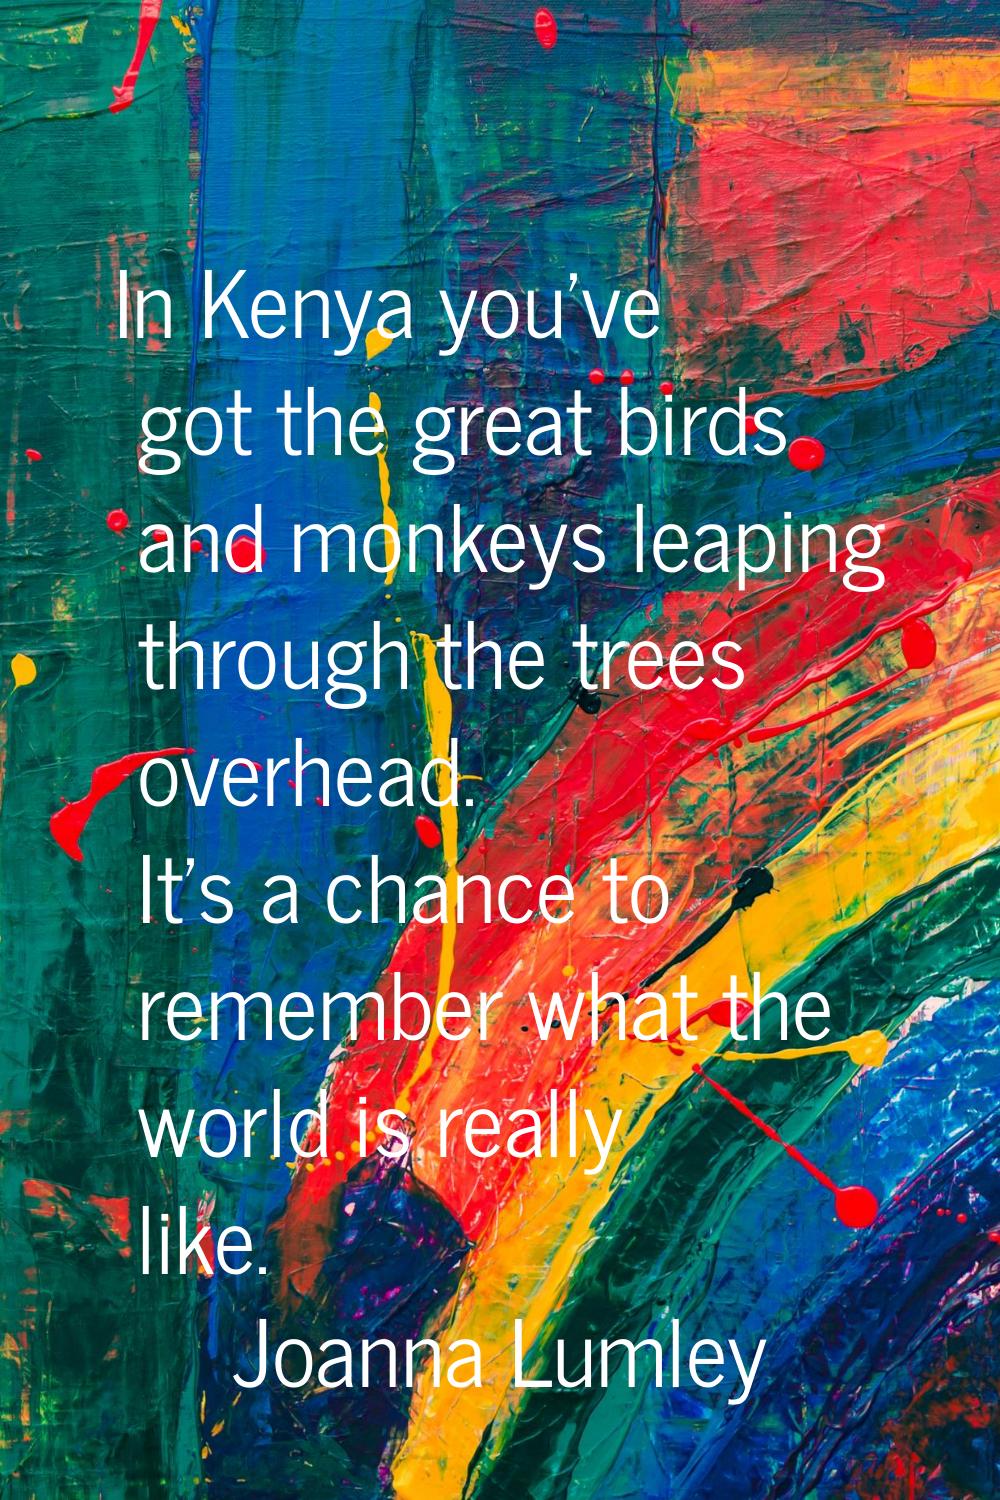 In Kenya you've got the great birds and monkeys leaping through the trees overhead. It's a chance t